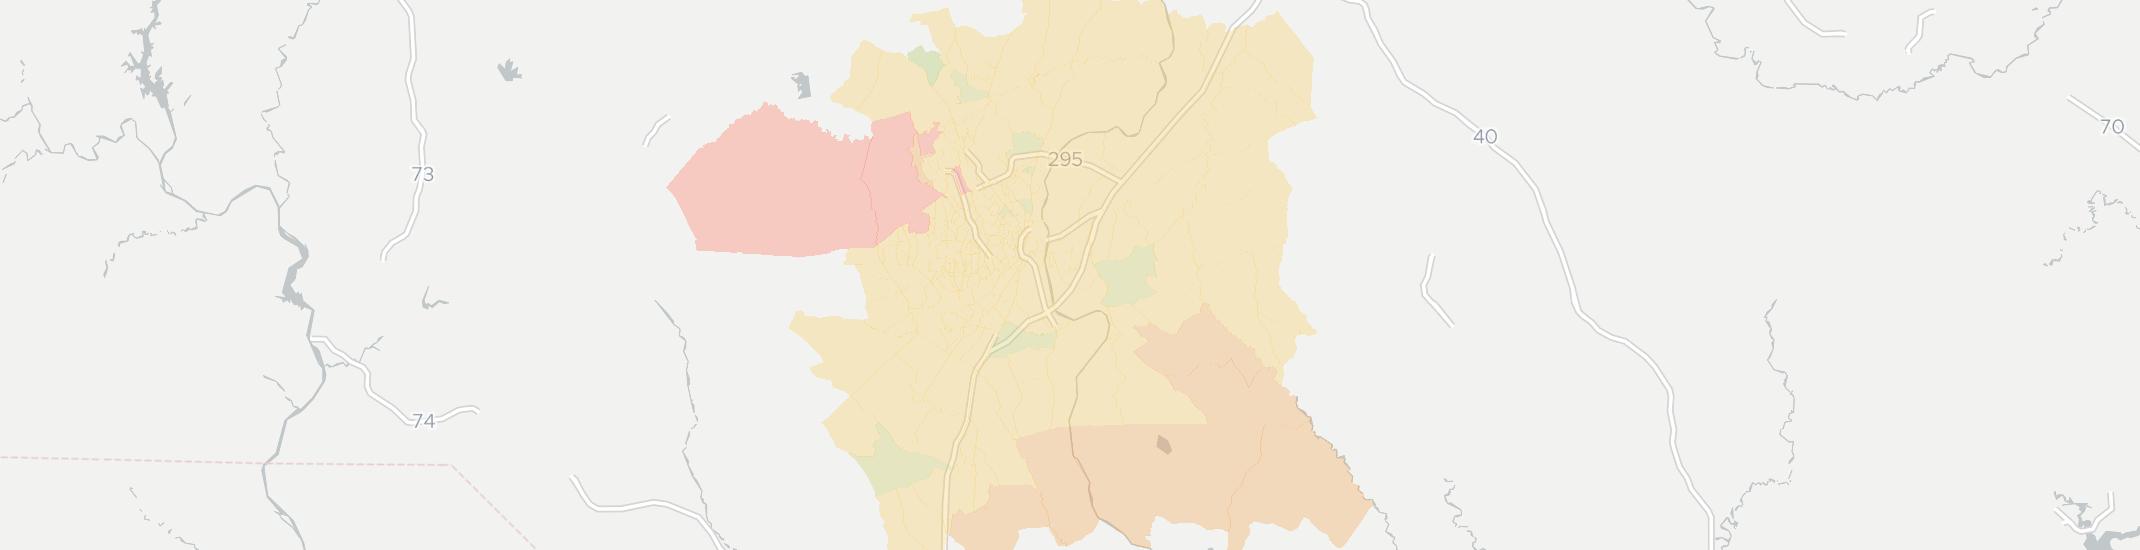 Fayetteville Internet Competition Map. Click for interactive map